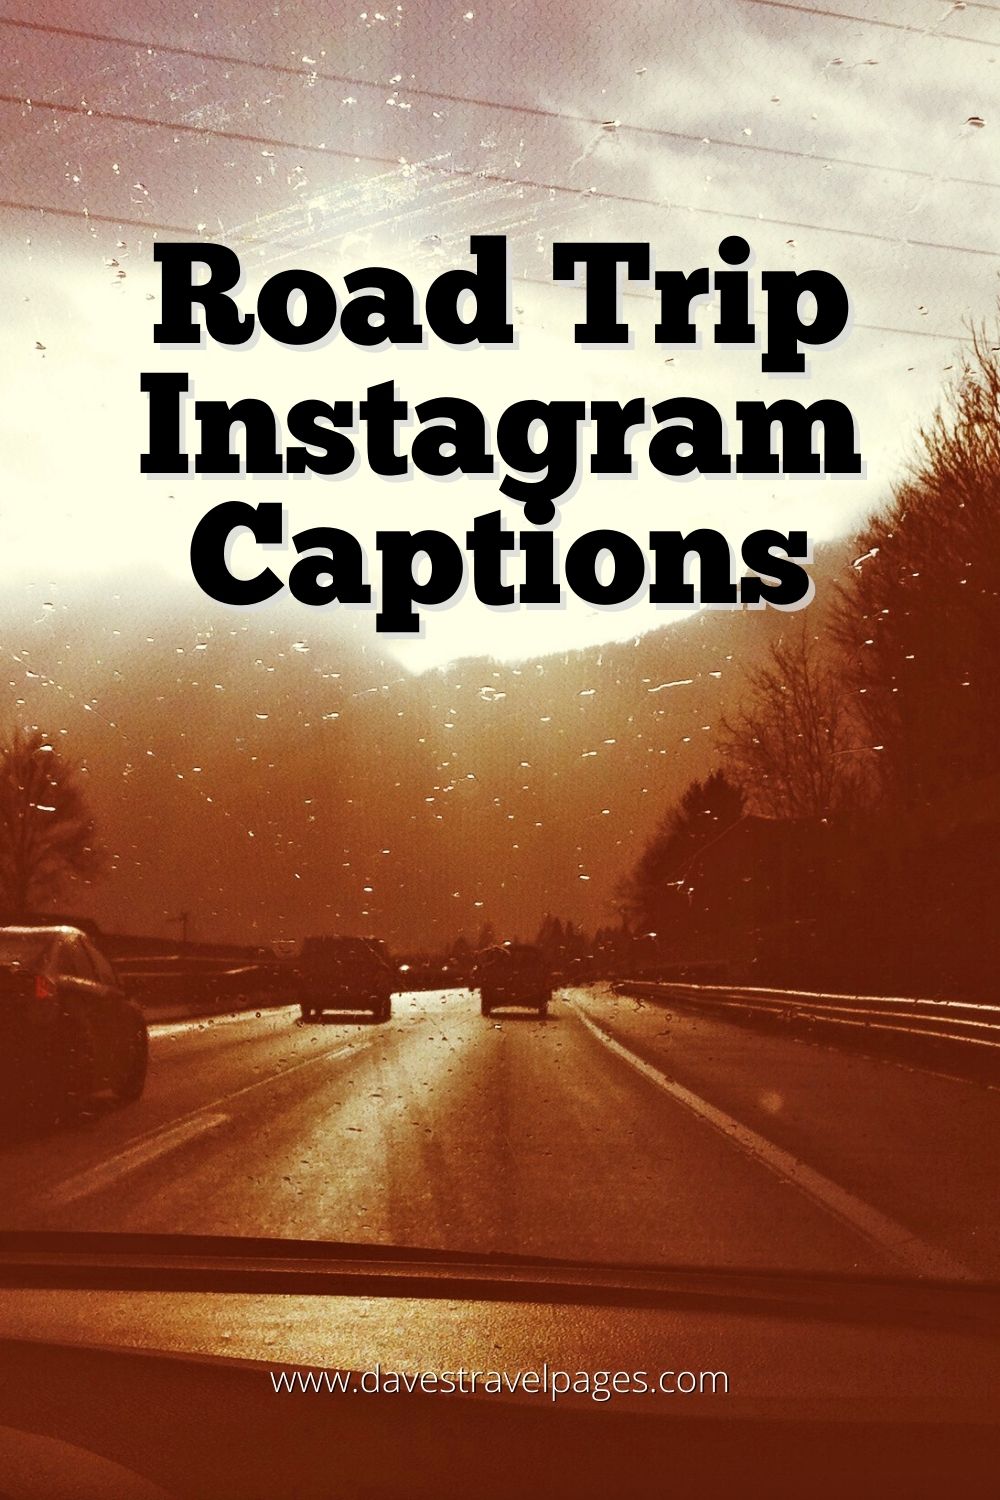 good road trip captions for instagram